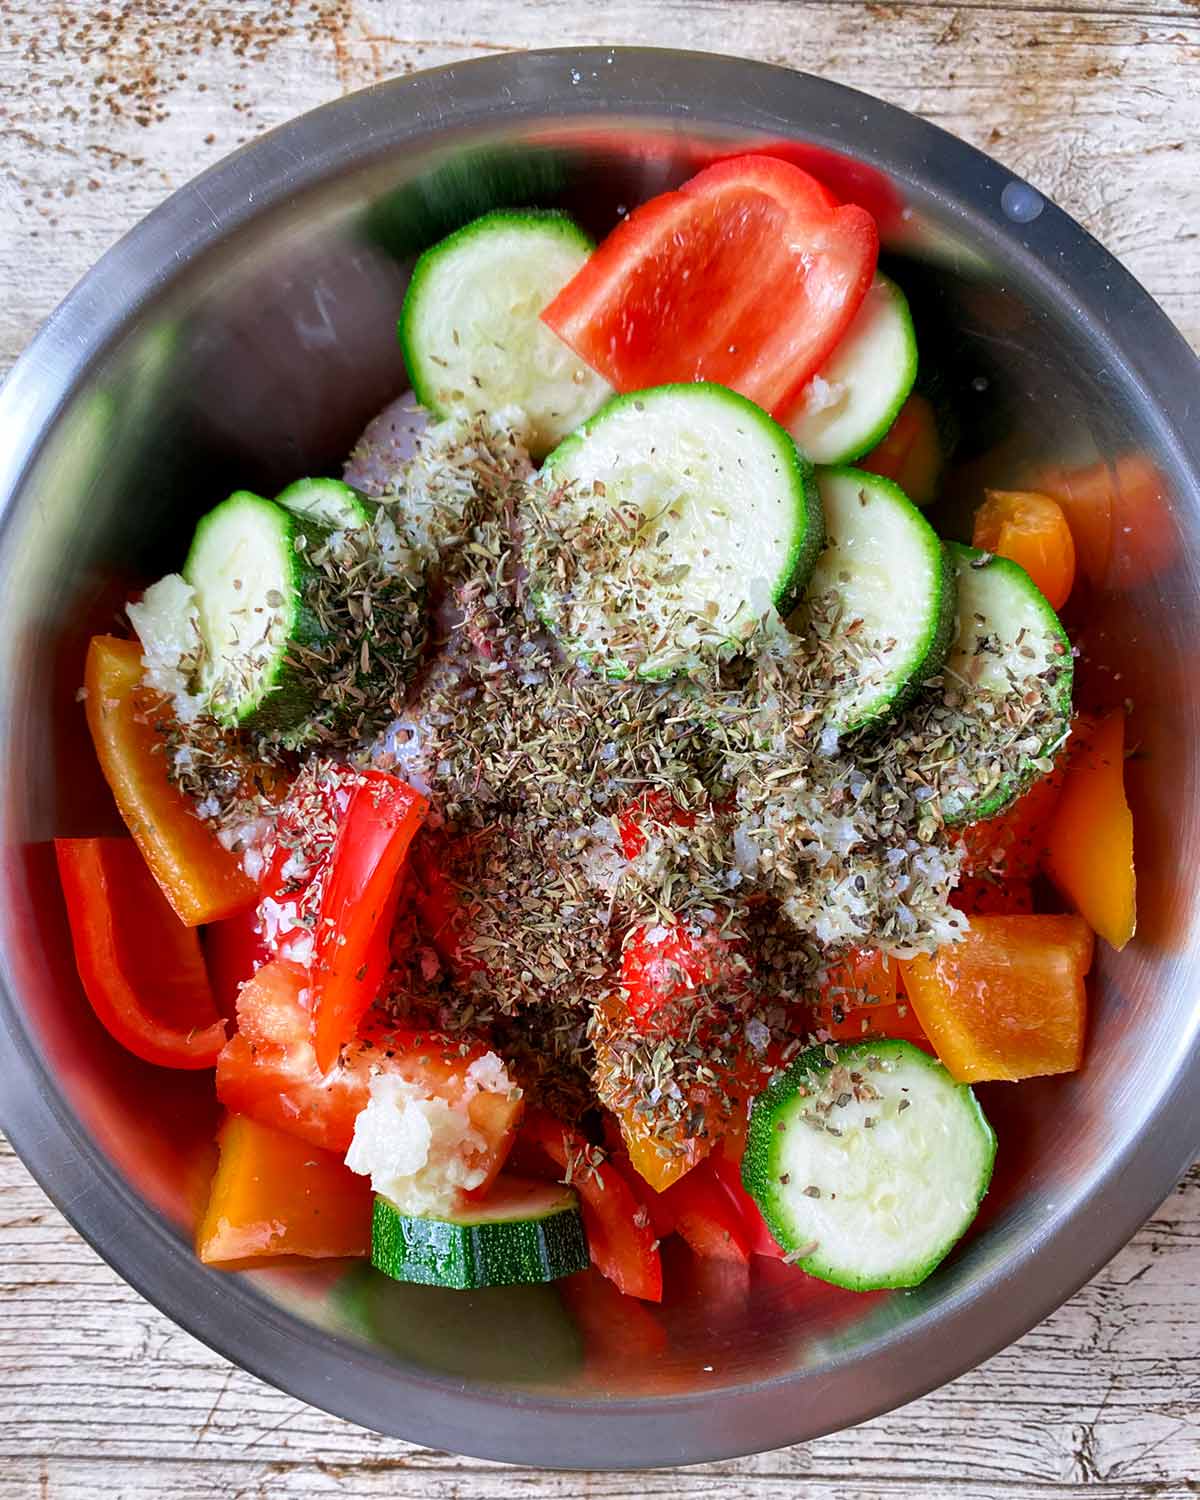 A metal mixing bowl containing chicken and vegetables all covered in a herb marinade.